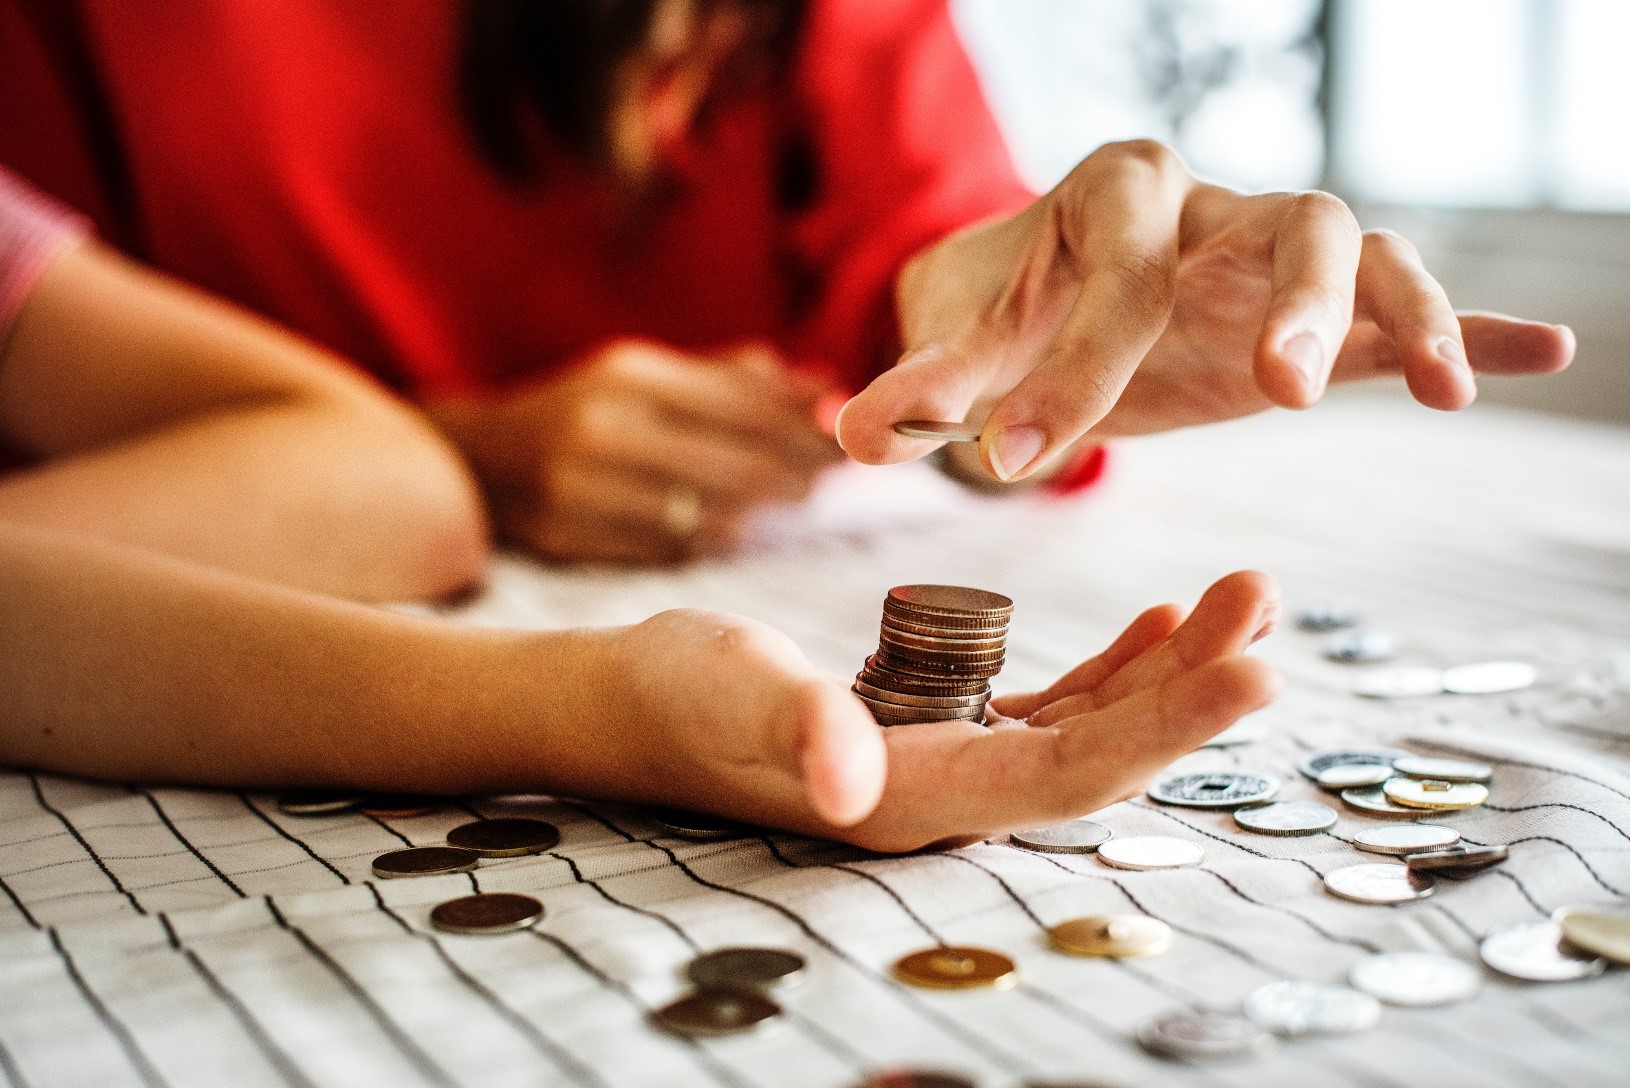 A hand with a stack of coins in the middle, and a woman placing on more coin onto the stack.